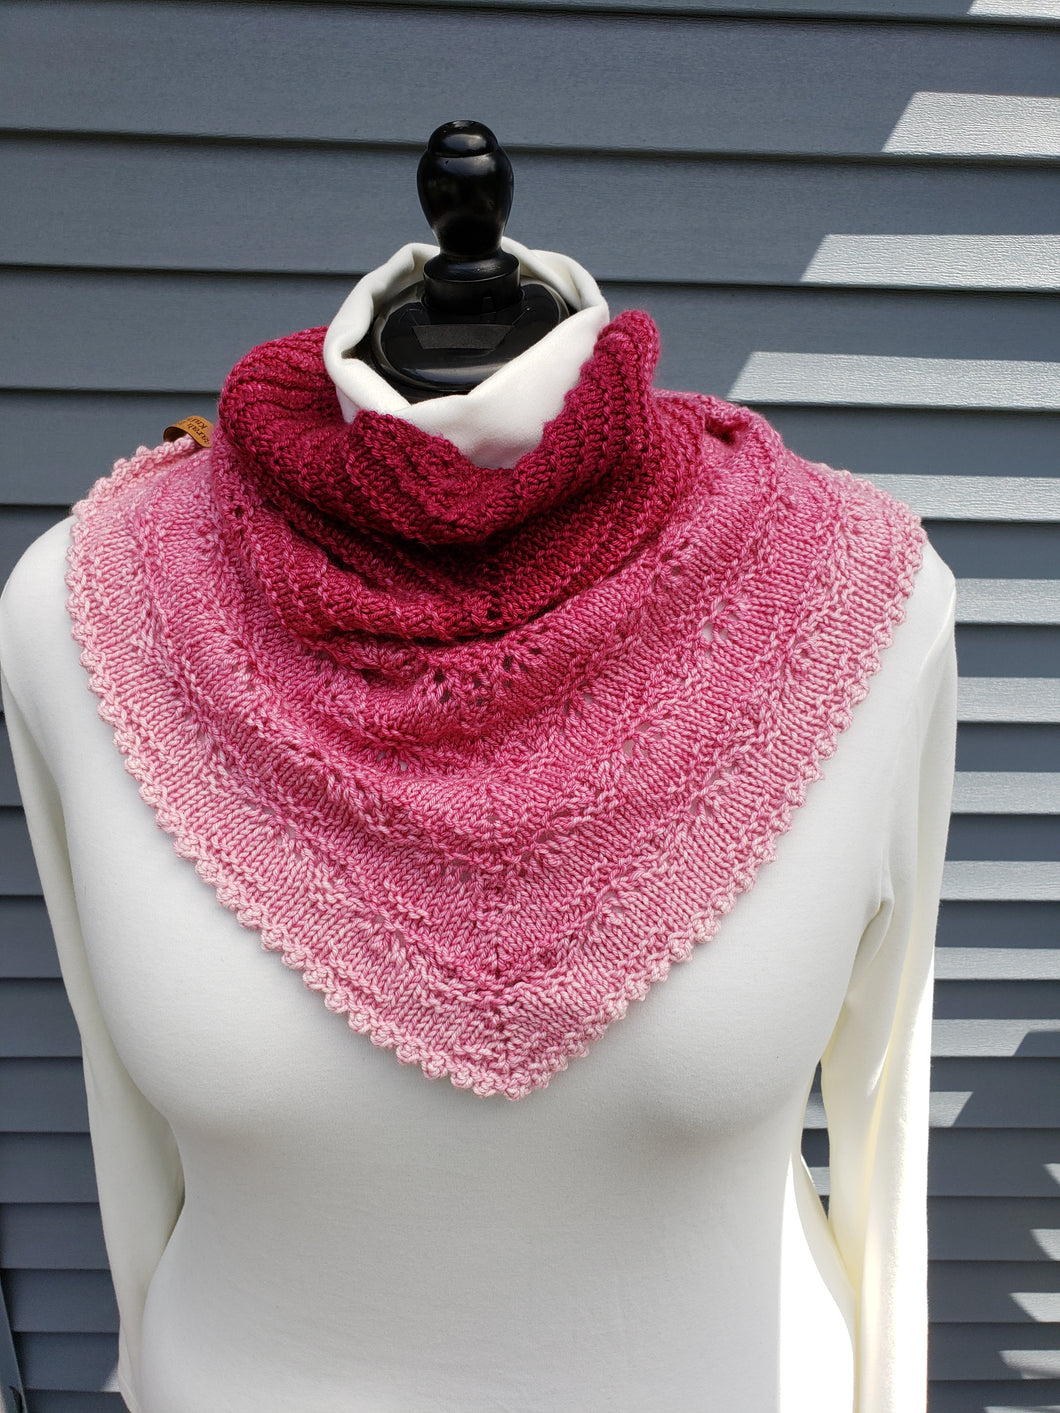 Lacy cowl from neck to bust in gradient yarn -- red at neck to light pink at bust.